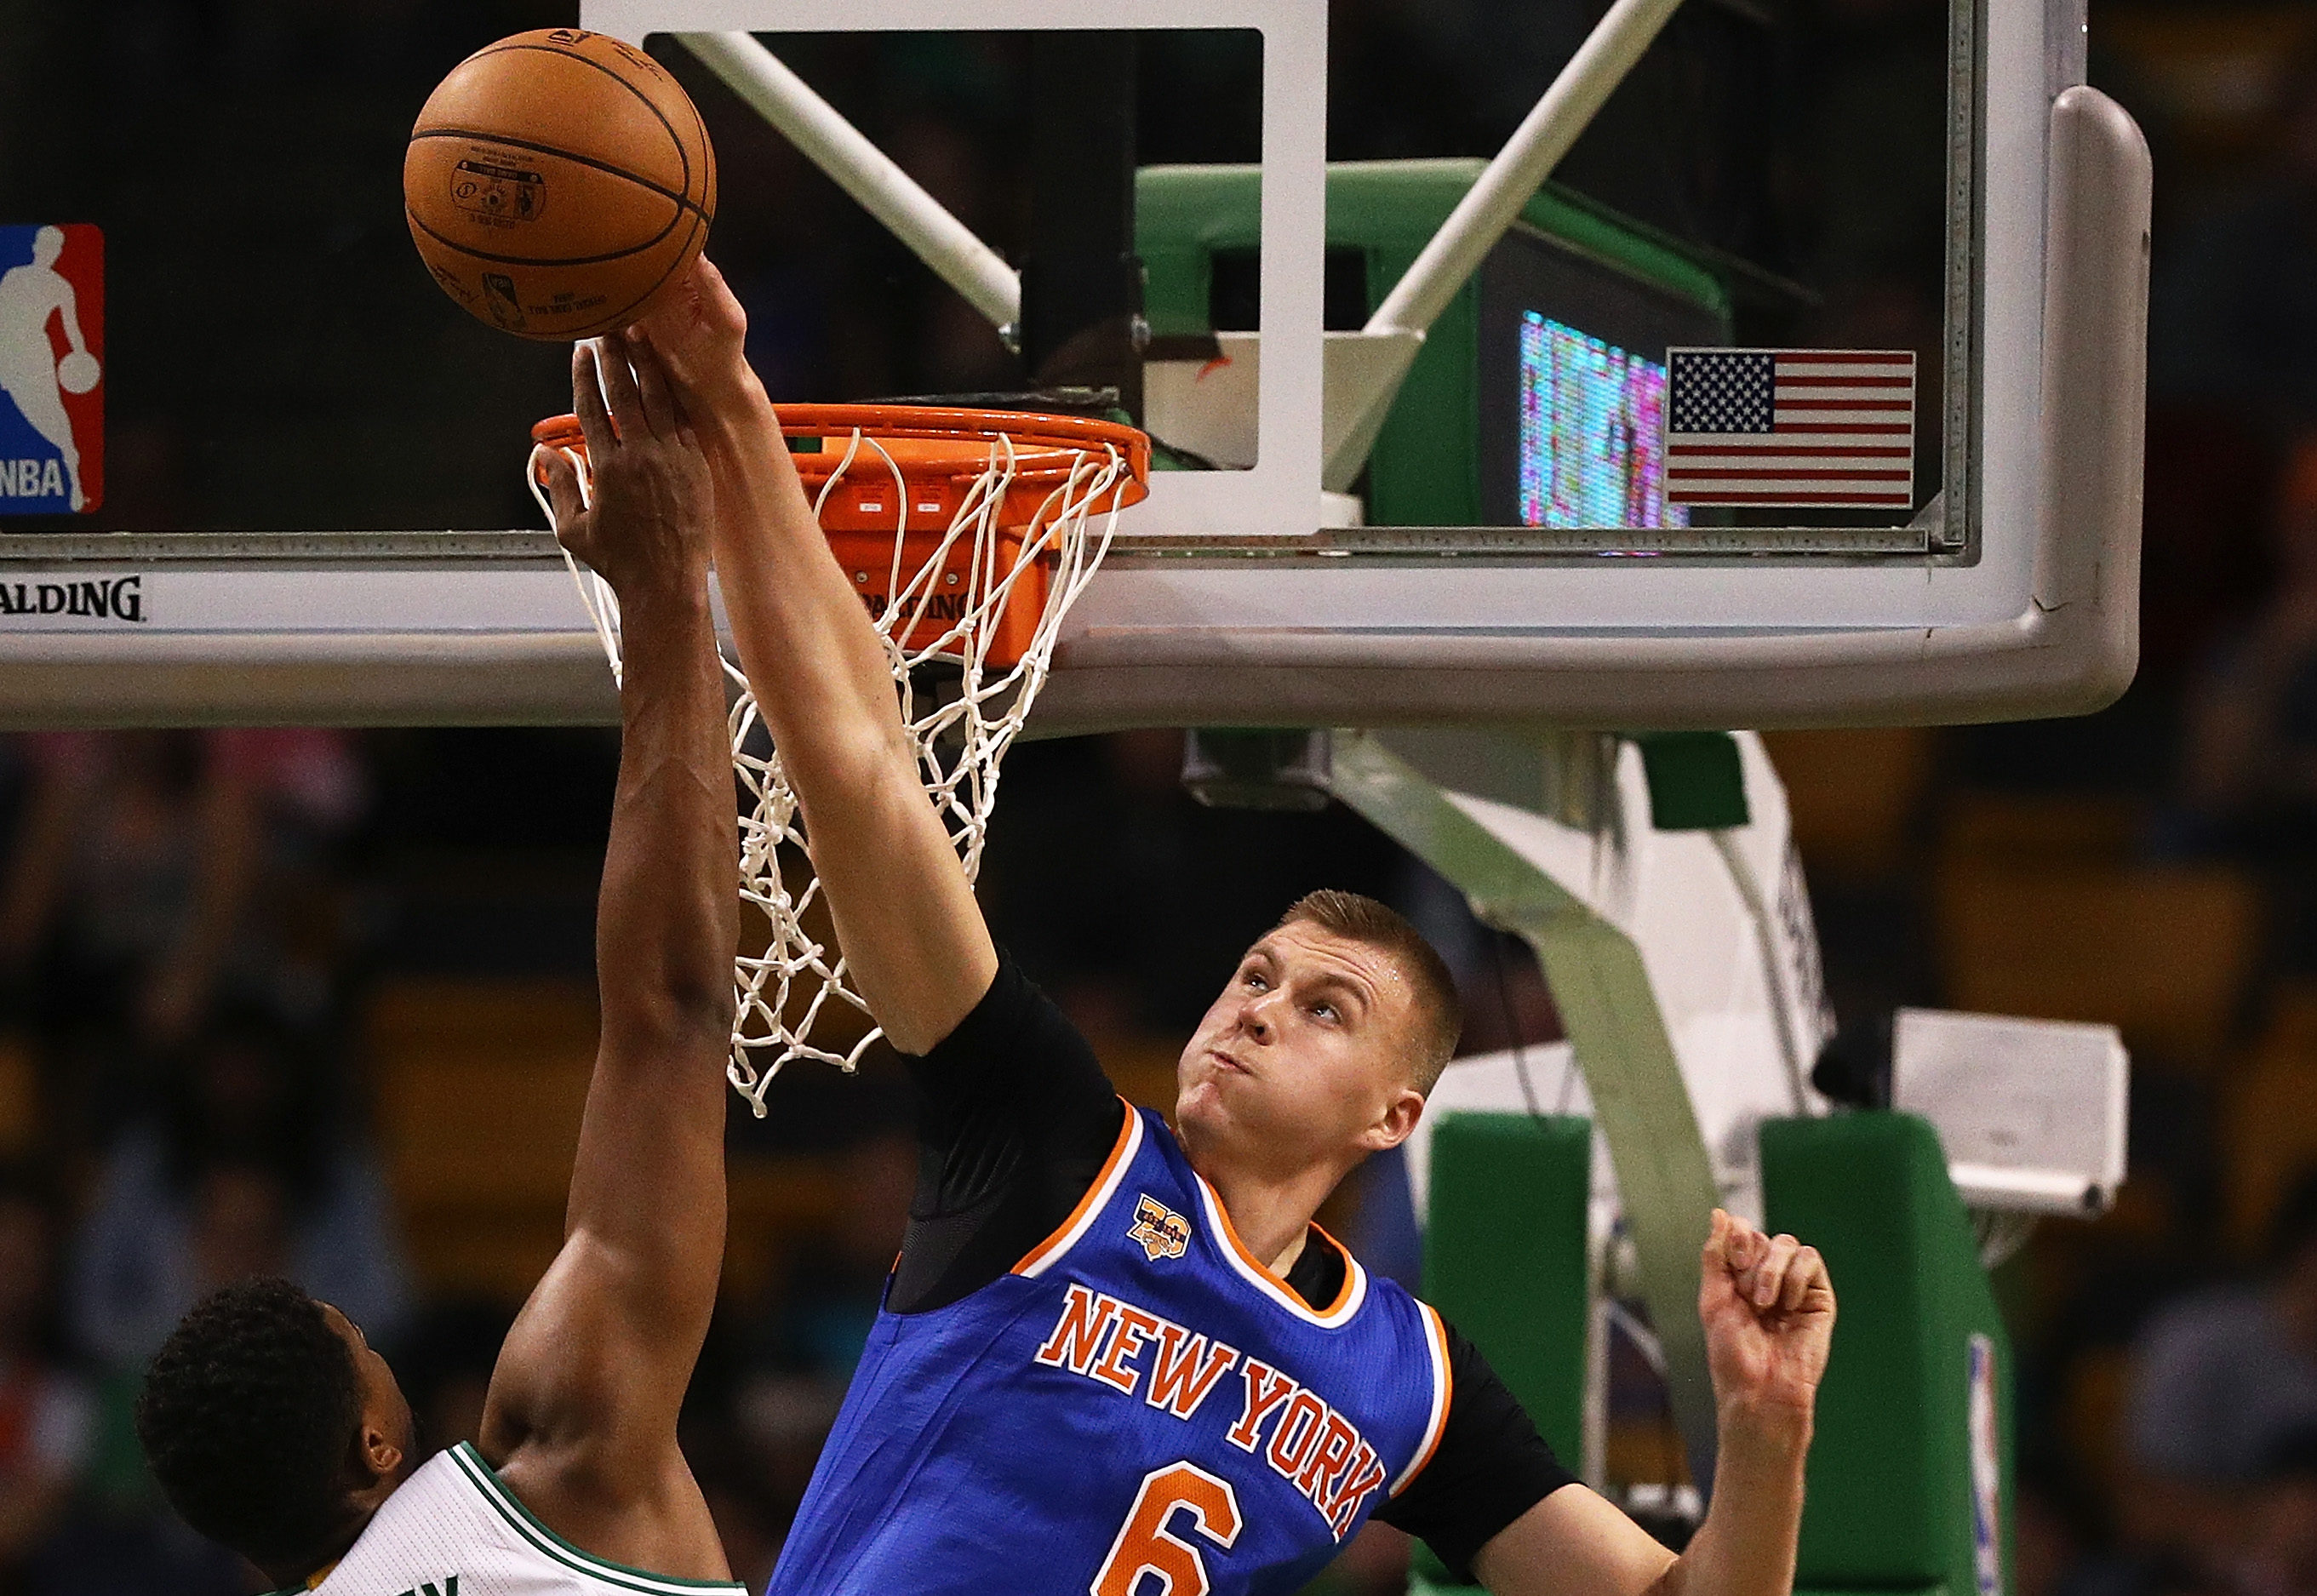 BOSTON, MA - OCTOBER 17: Kristaps Porzingis #6 of the New York Knicks blocks a shot by Jordan Mickey #55 of the Boston Celtics during the second quarter at TD Garden on October 17, 2016 in Boston, Massachusetts. (Photo by Maddie Meyer/Getty Images)